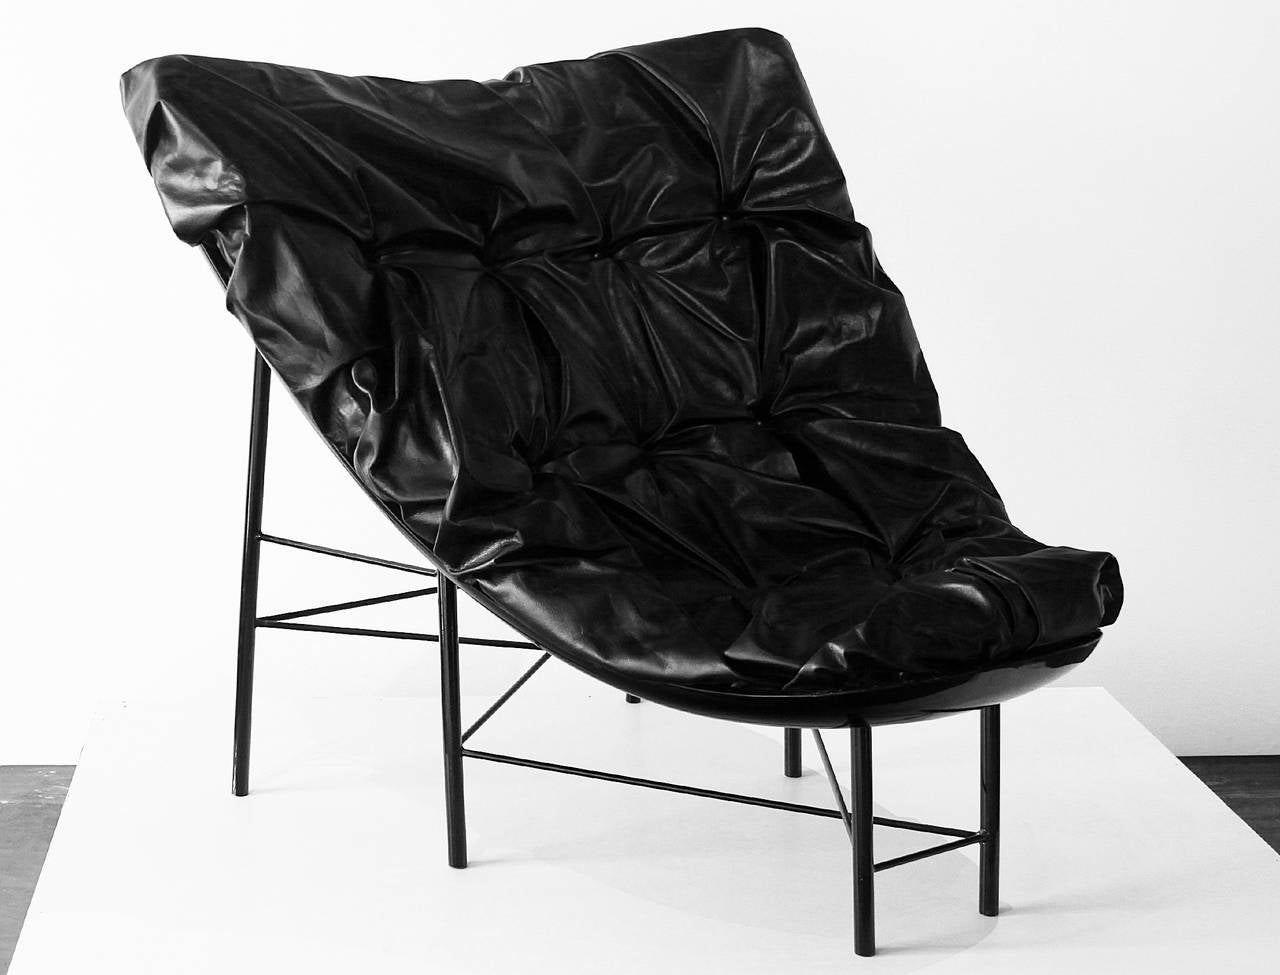 A unique arm chair made out of a Volkswagen Beetle hood by Brazilian artist Alê Jordão. The cushion has been upholstered in a black leather and has been tufted. 

Many pieces are stored in our warehouse, so please click on CONTACT DEALER under